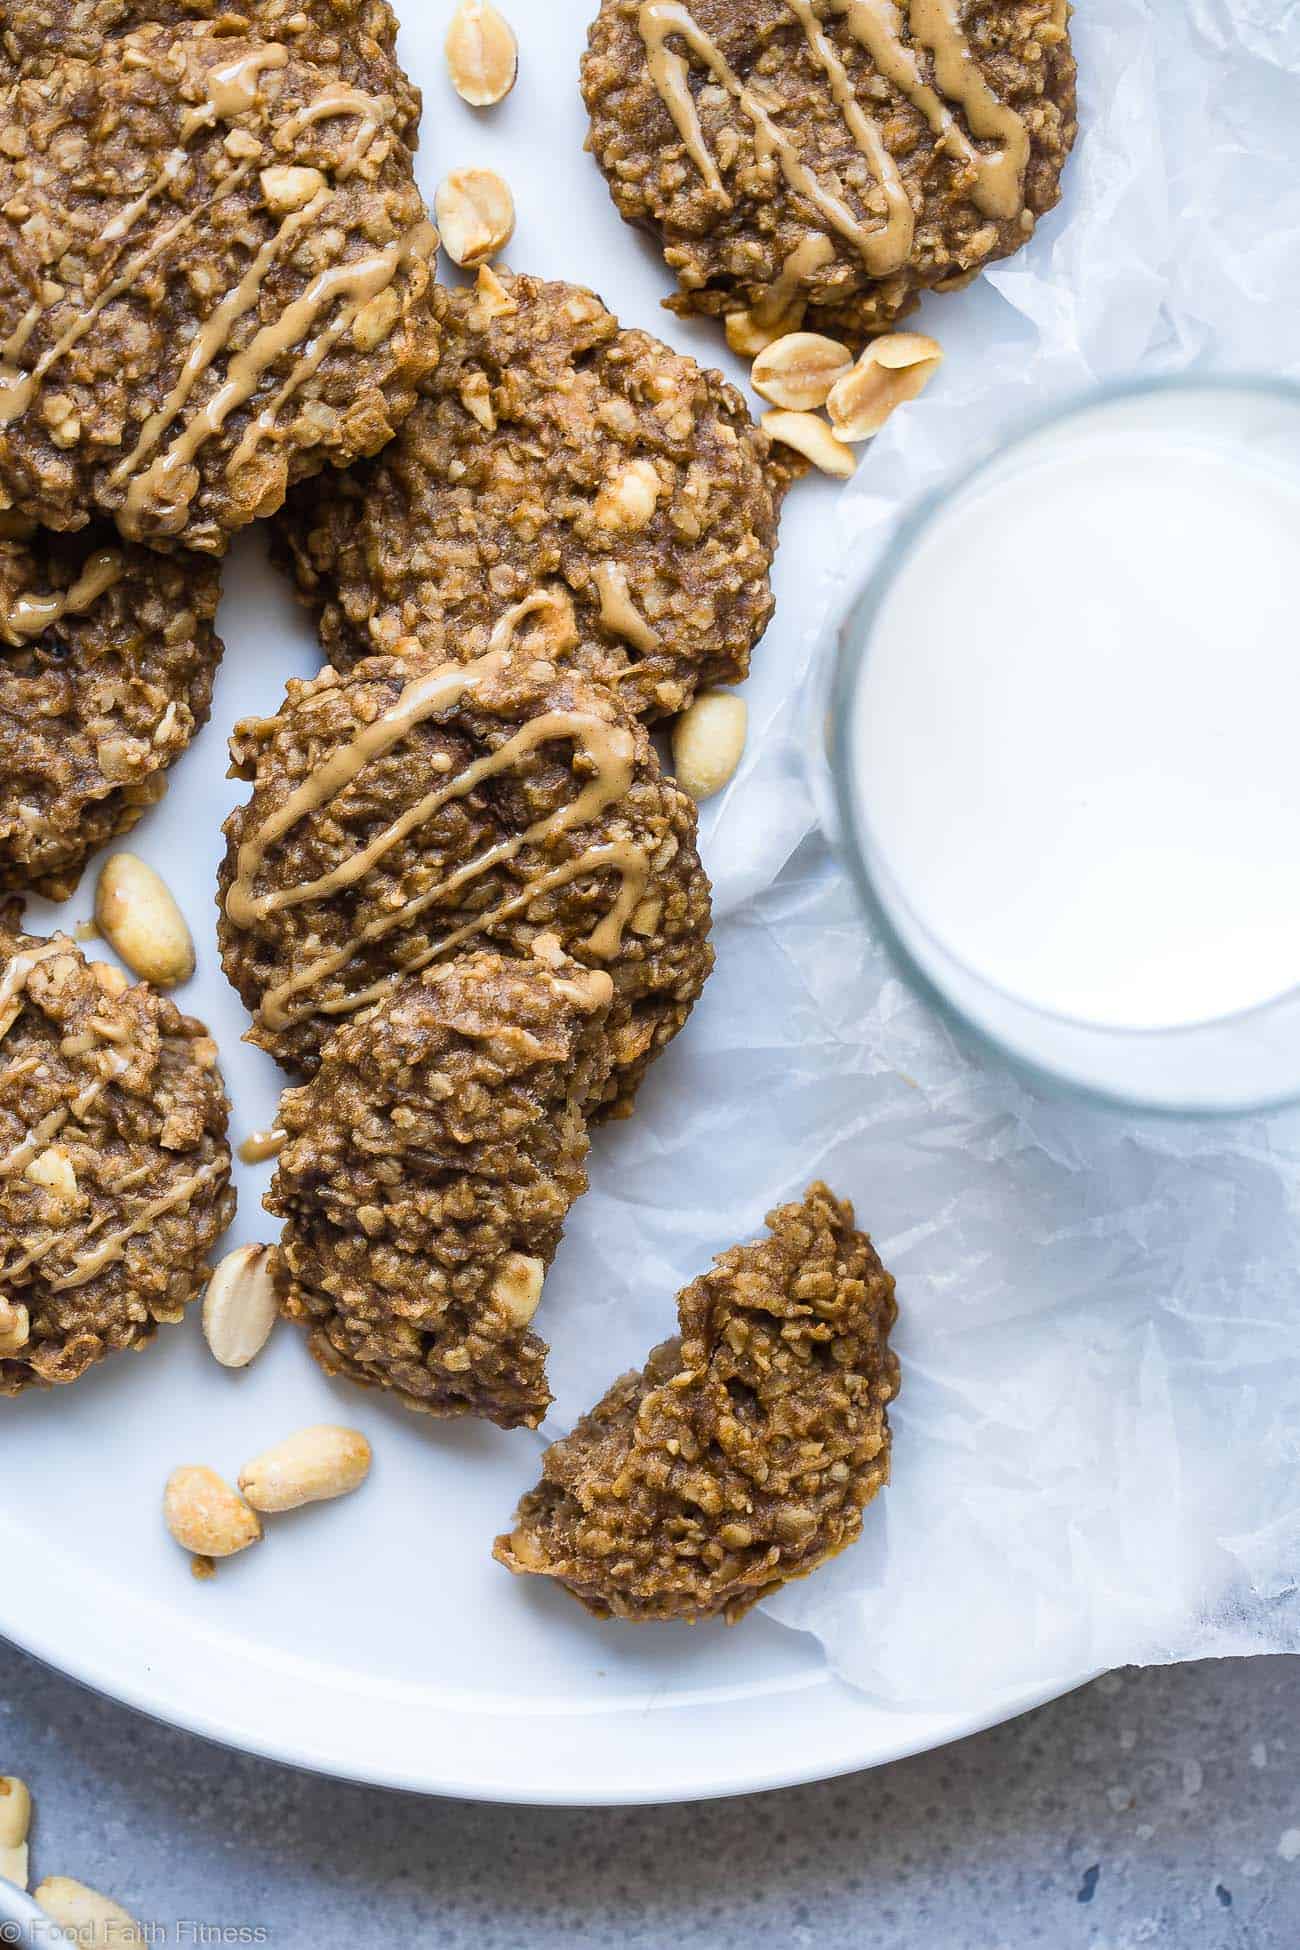 Easy Peanut Butter Oatmeal Banana Cookies - These gluten free oatmeal cookies use only 5 simple ingredients and are dairy free and vegan friendly! A healthy treat for kids and adults that can be a breakfast or snack! | Foodfaithfitness.com | @FoodFaithFit